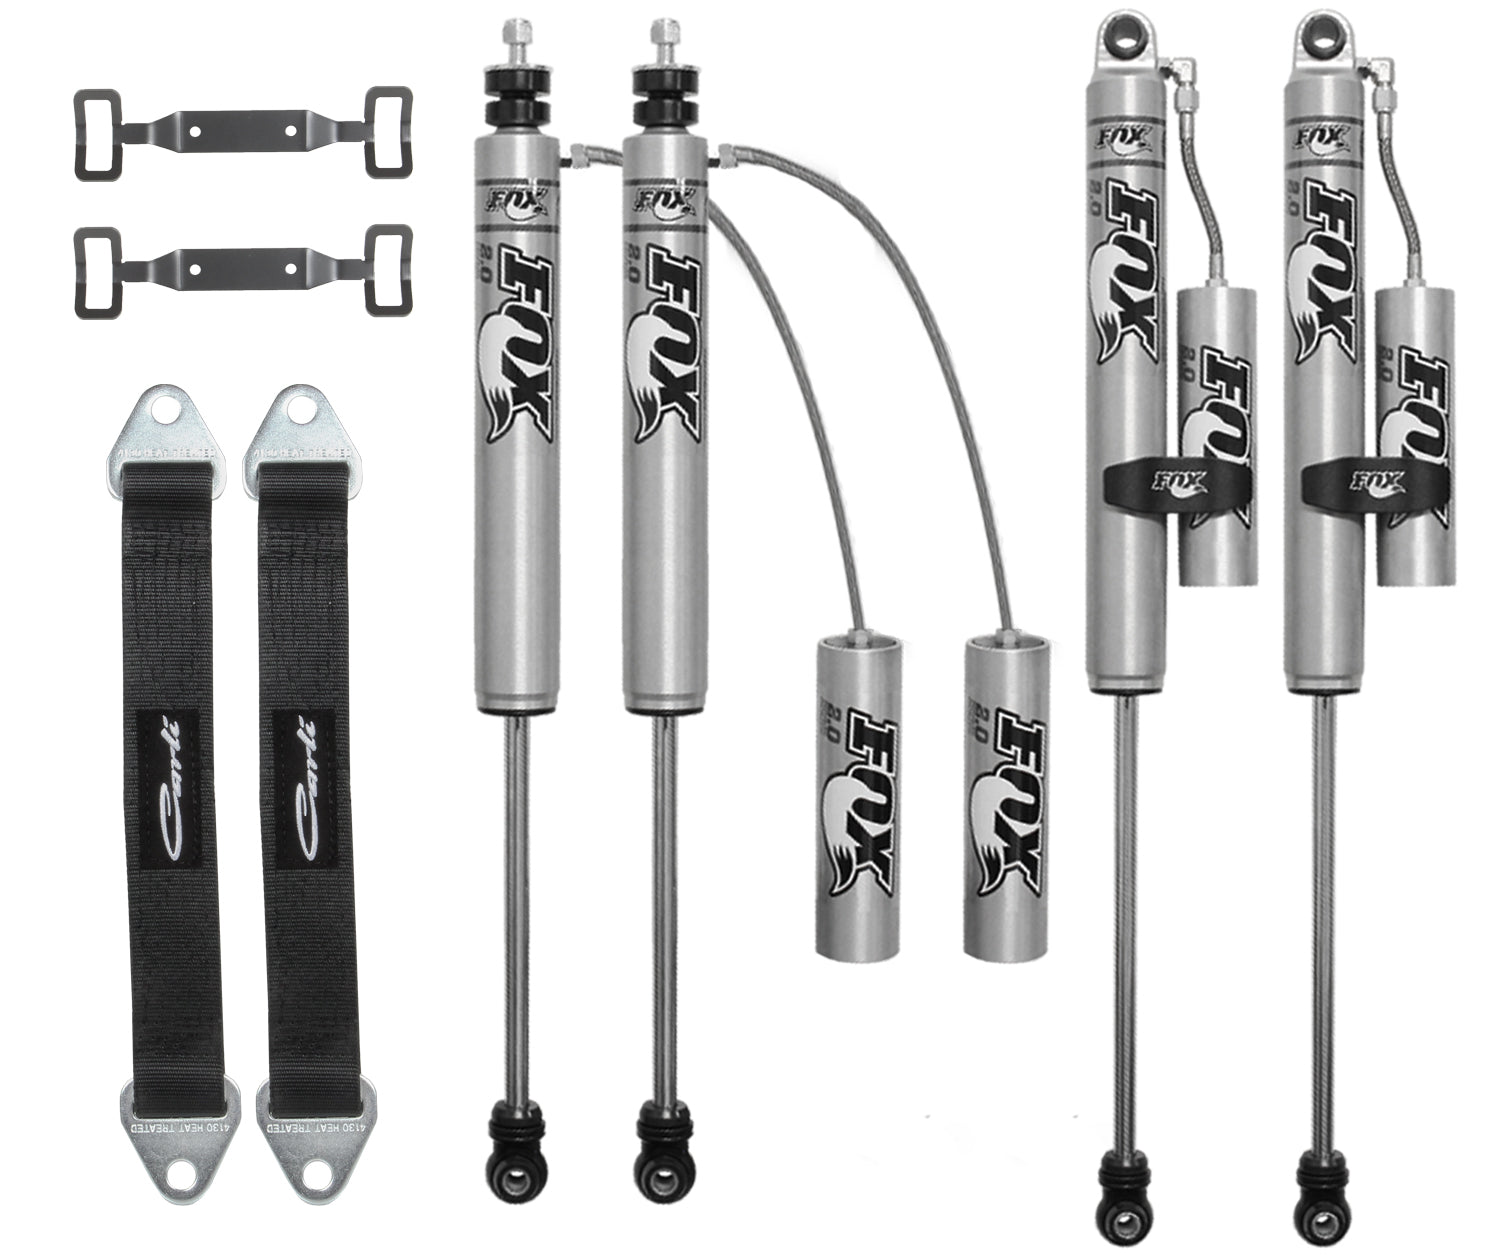 Carli Suspension Backcountry 6" Shock Package